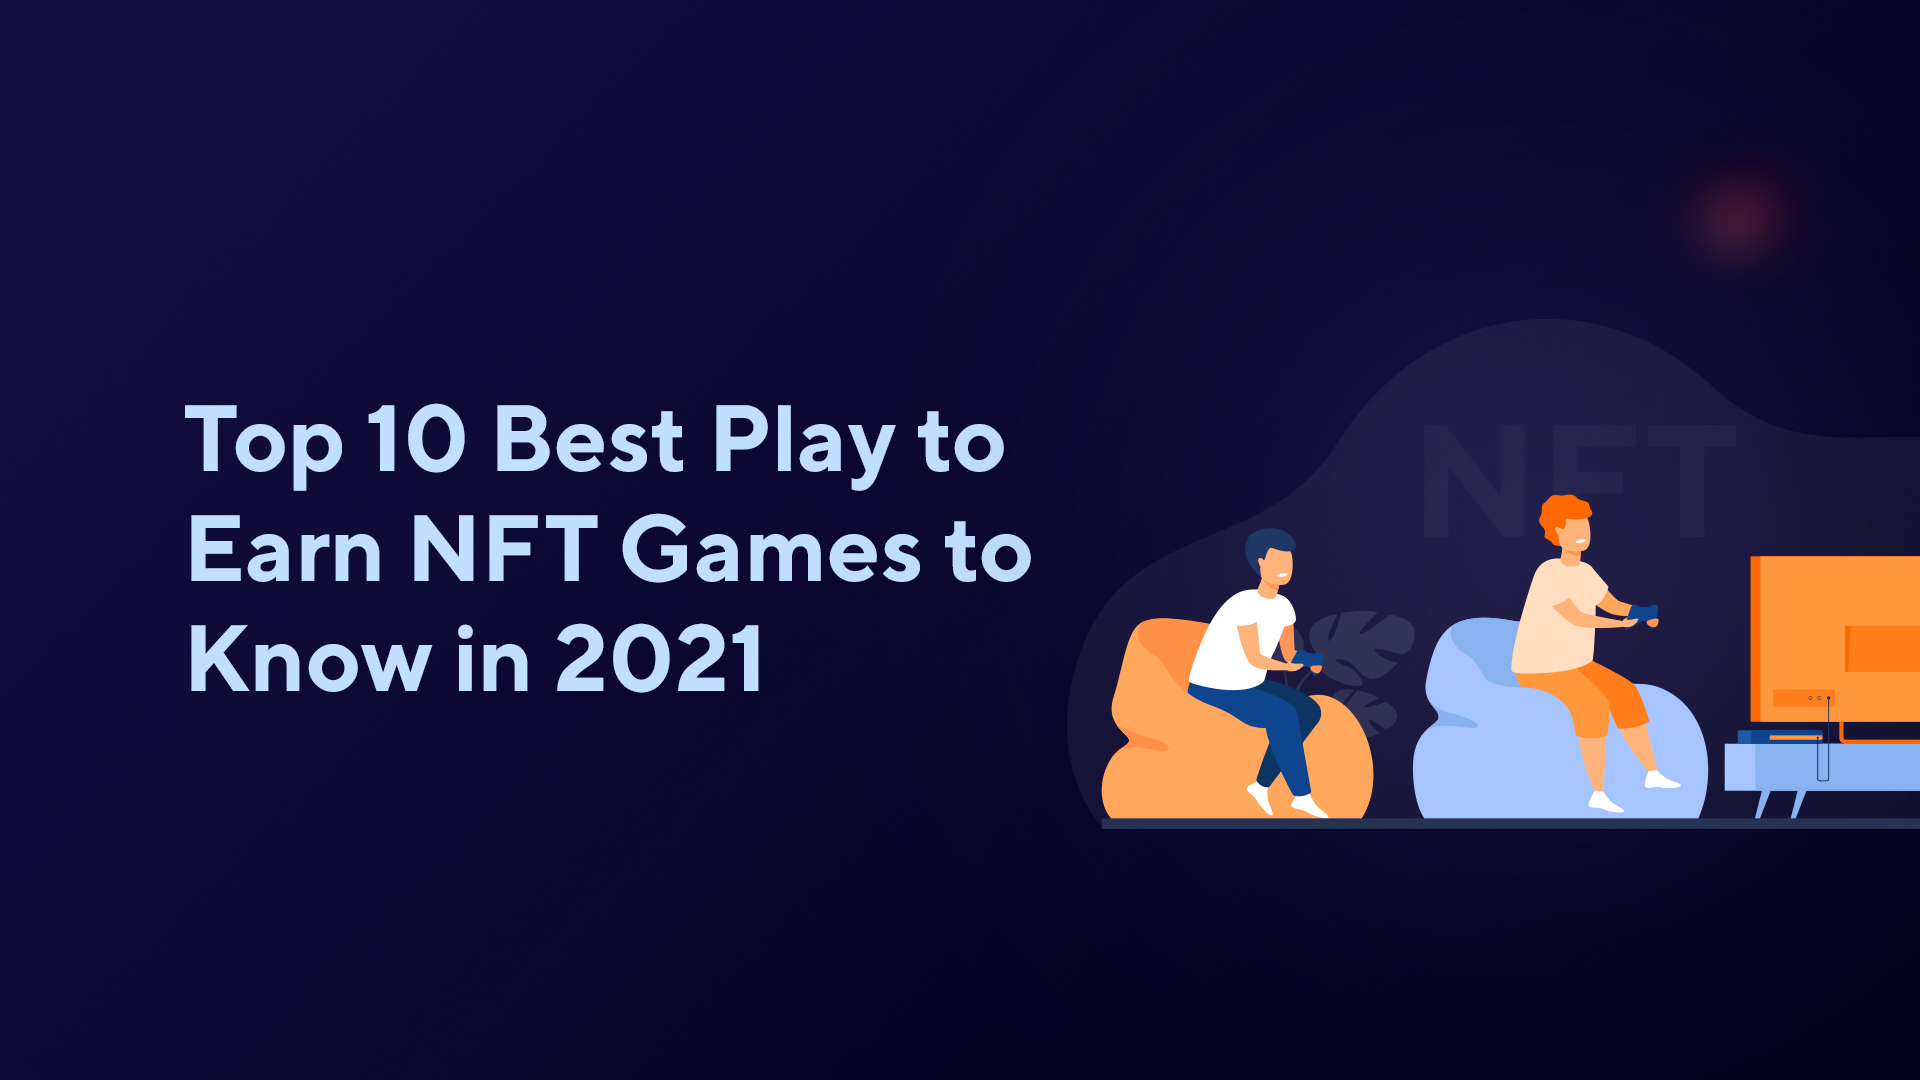 Top 10 Best Play to Earn NFT Games to Know in 2021